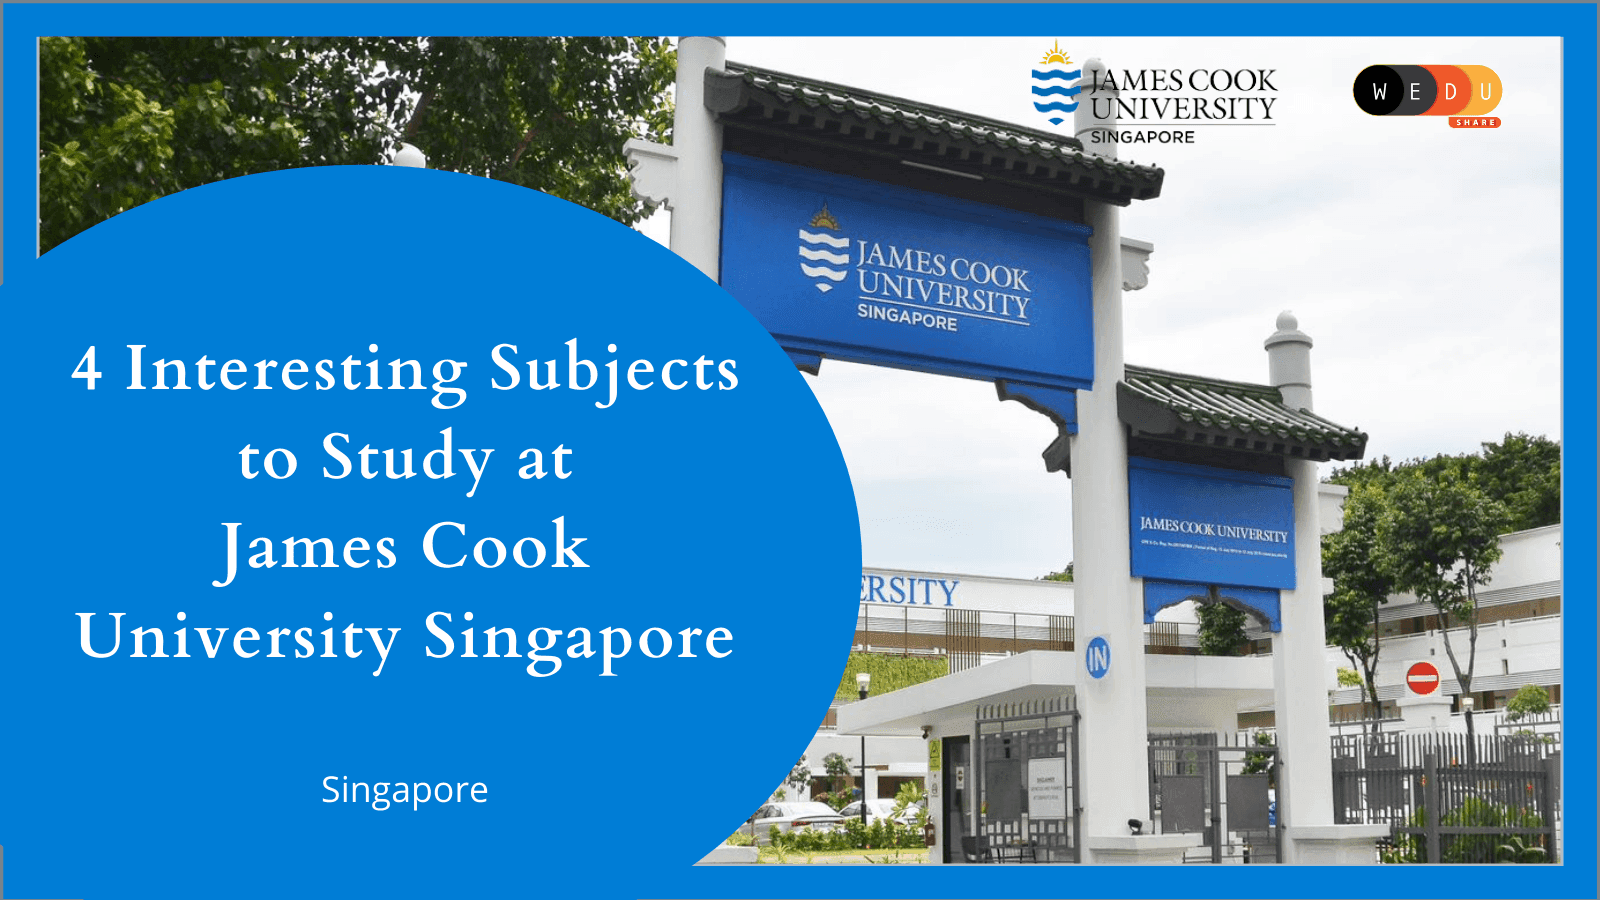 4 Interesting Subjects to Study at James Cook University Singapore